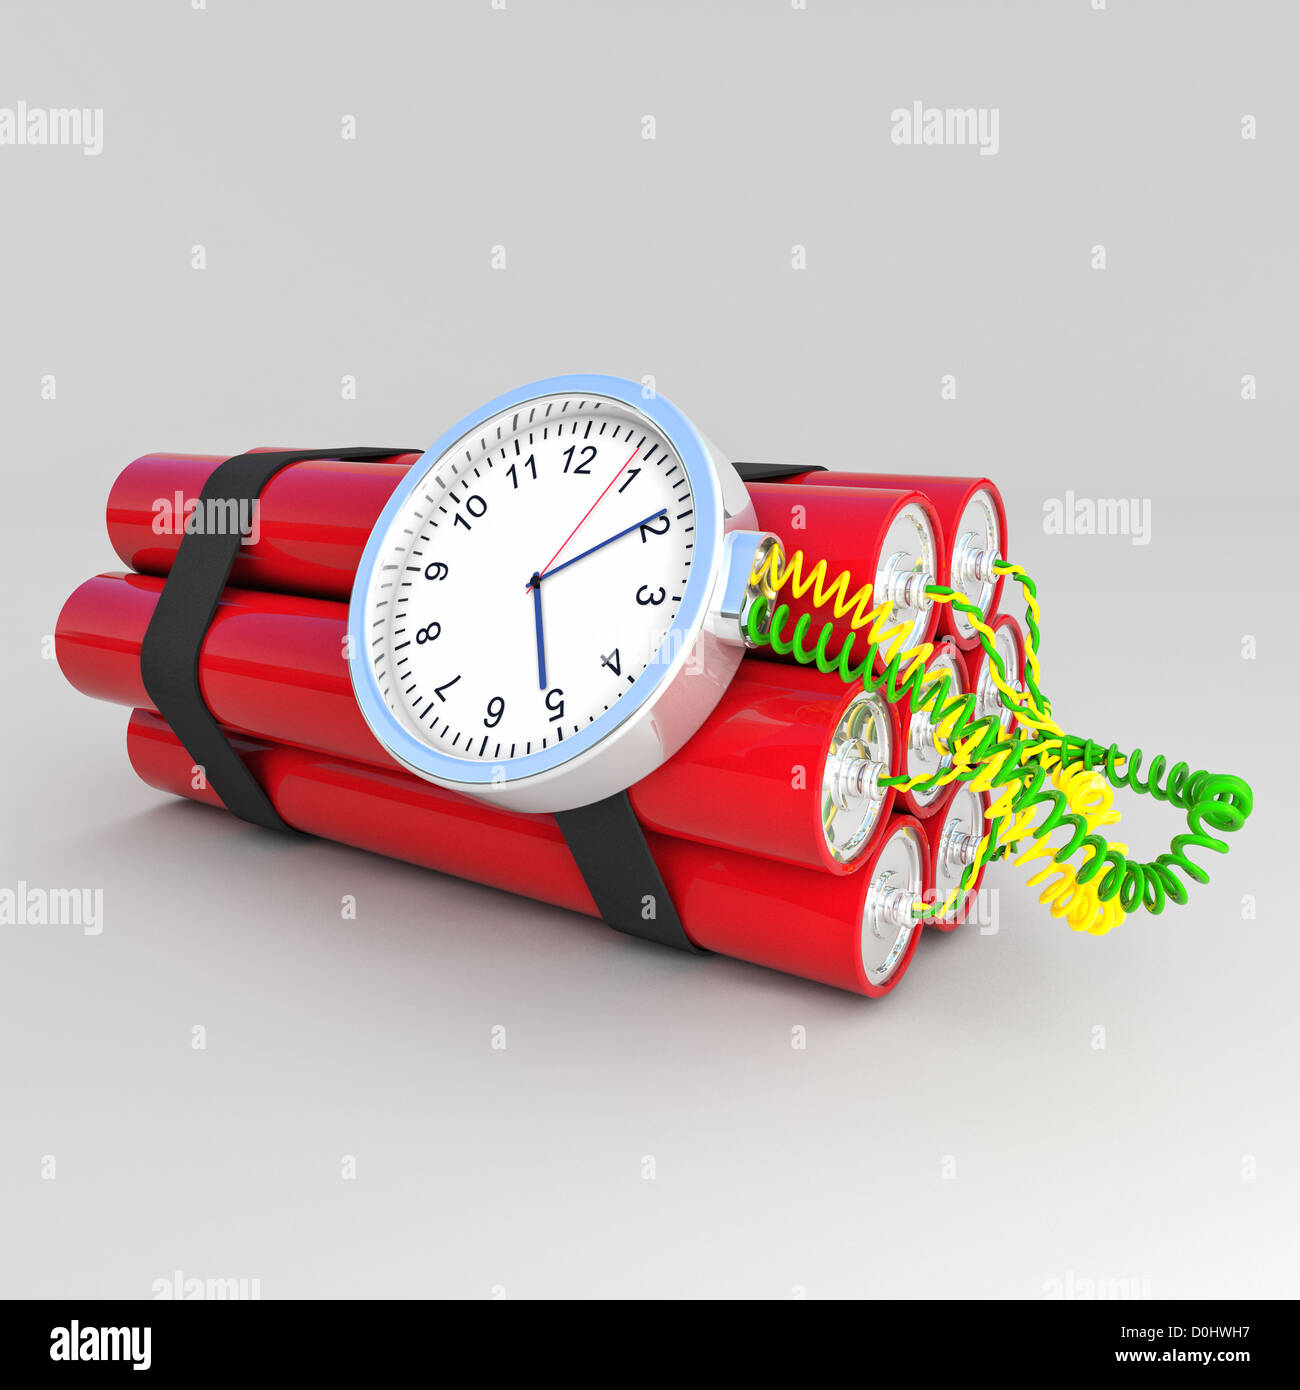 3d image of time bomb Stock Photo